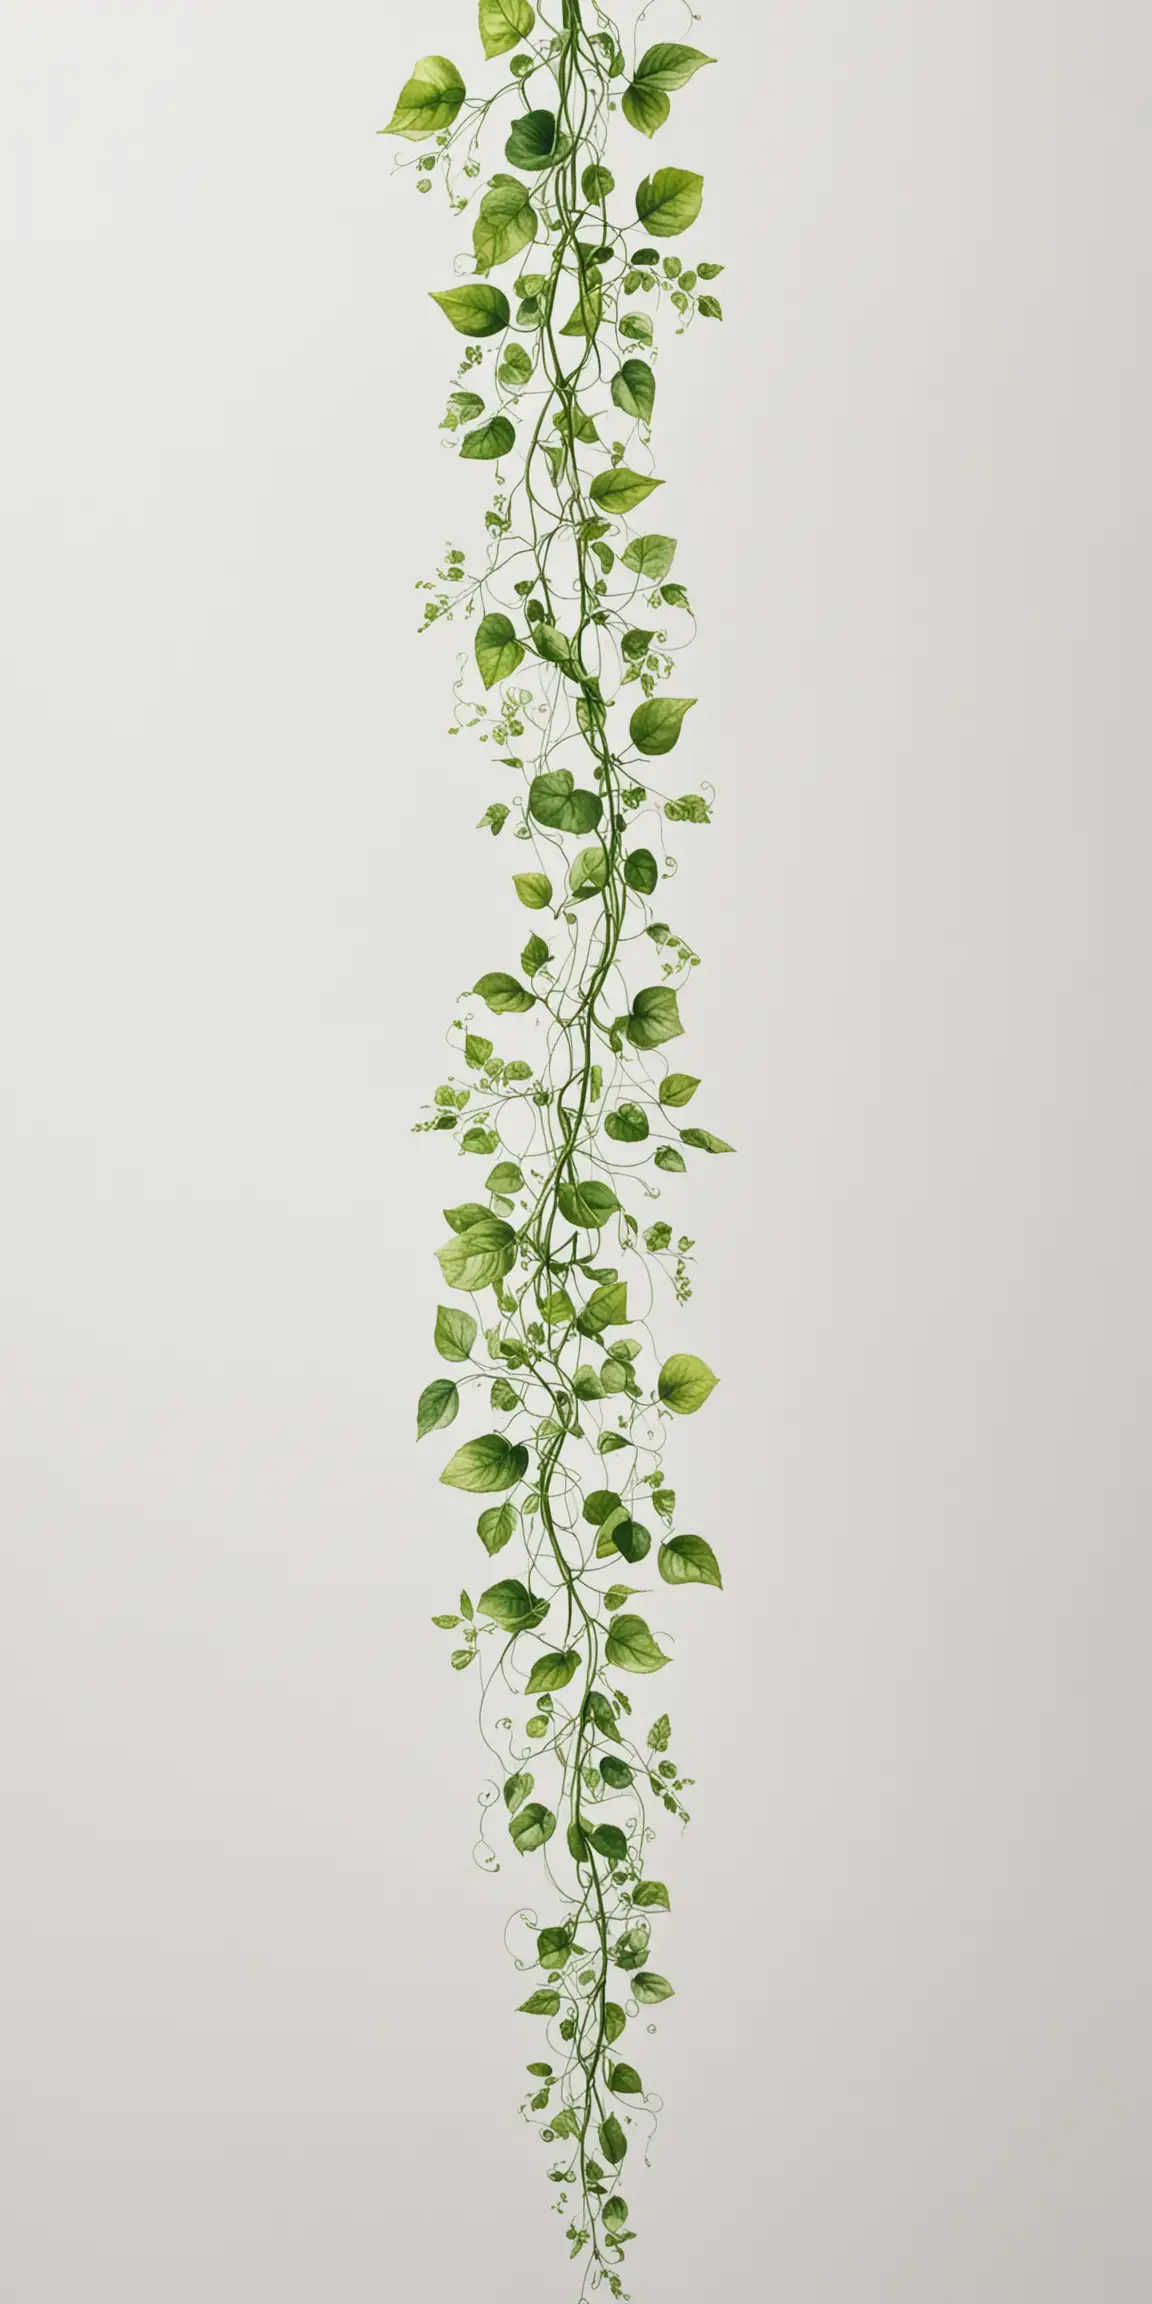 Realistic Green Vine Trailing Down Center of Image